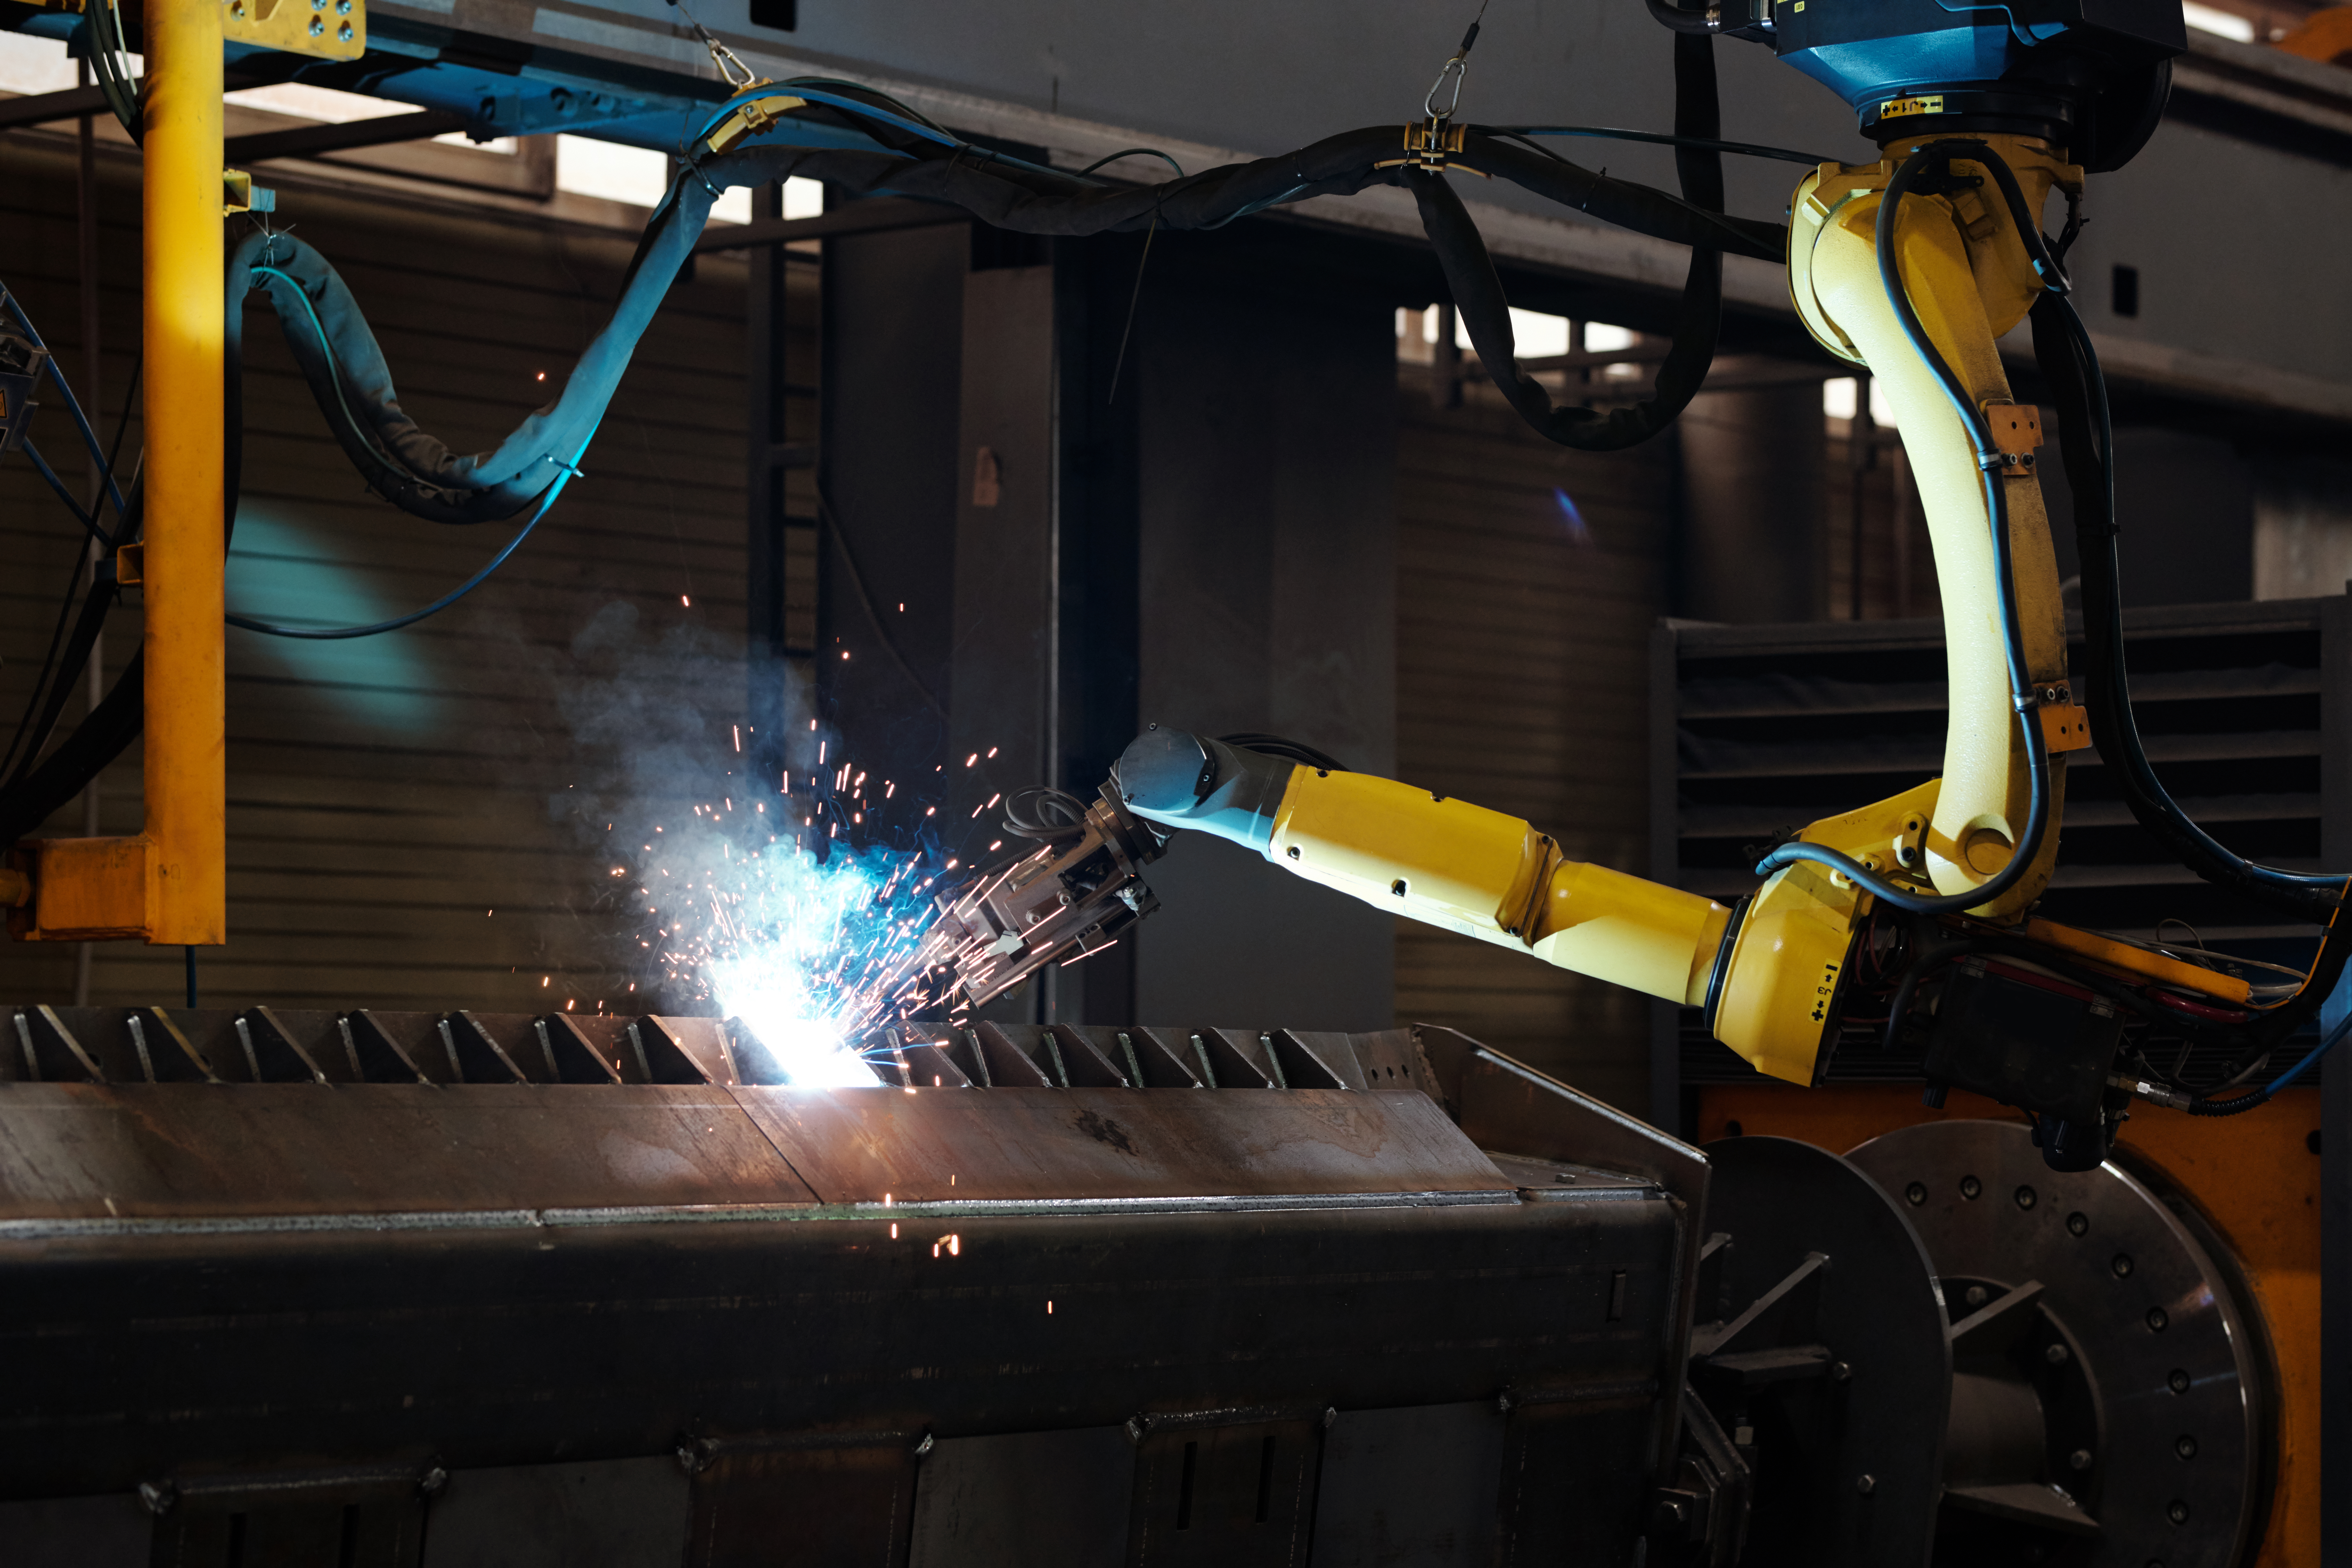 Arc welding of part of huge iron industrial automated machine during process of repairing inside machinery production plant